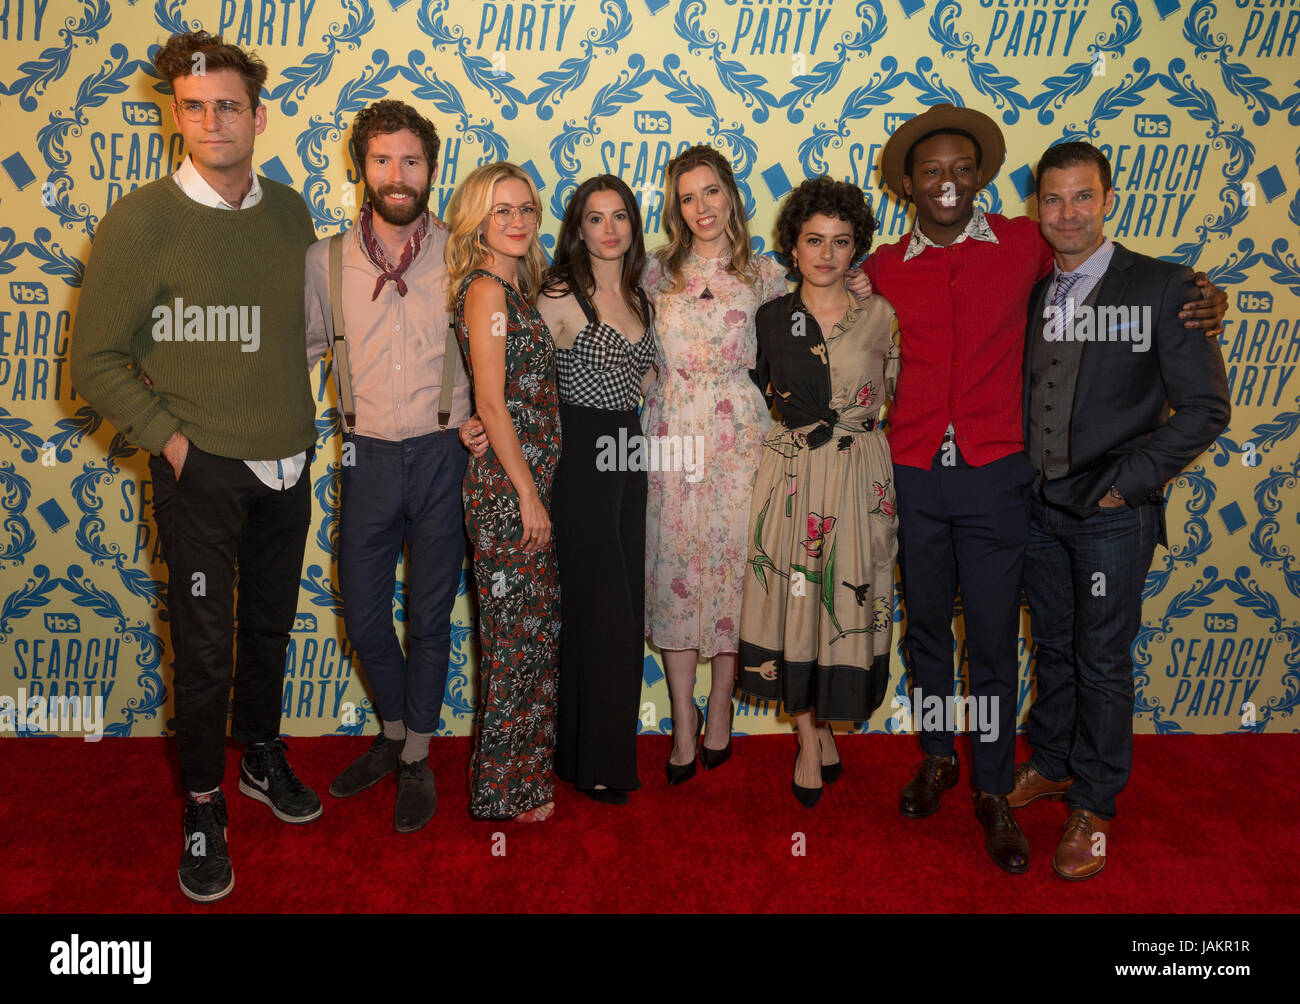 New York, United States. 06th June, 2017. John Reynolds, Charles Rogers, Meredith Hagner, Lilly Burns, Sarah-Violet Bliss, Alia Shawkat, Brandon Michael Hall, Brett Weitz attend Search Party comedy by TBS at McKittrick Hotel Credit: Lev Radin/Pacific Press/Alamy Live News Stock Photo